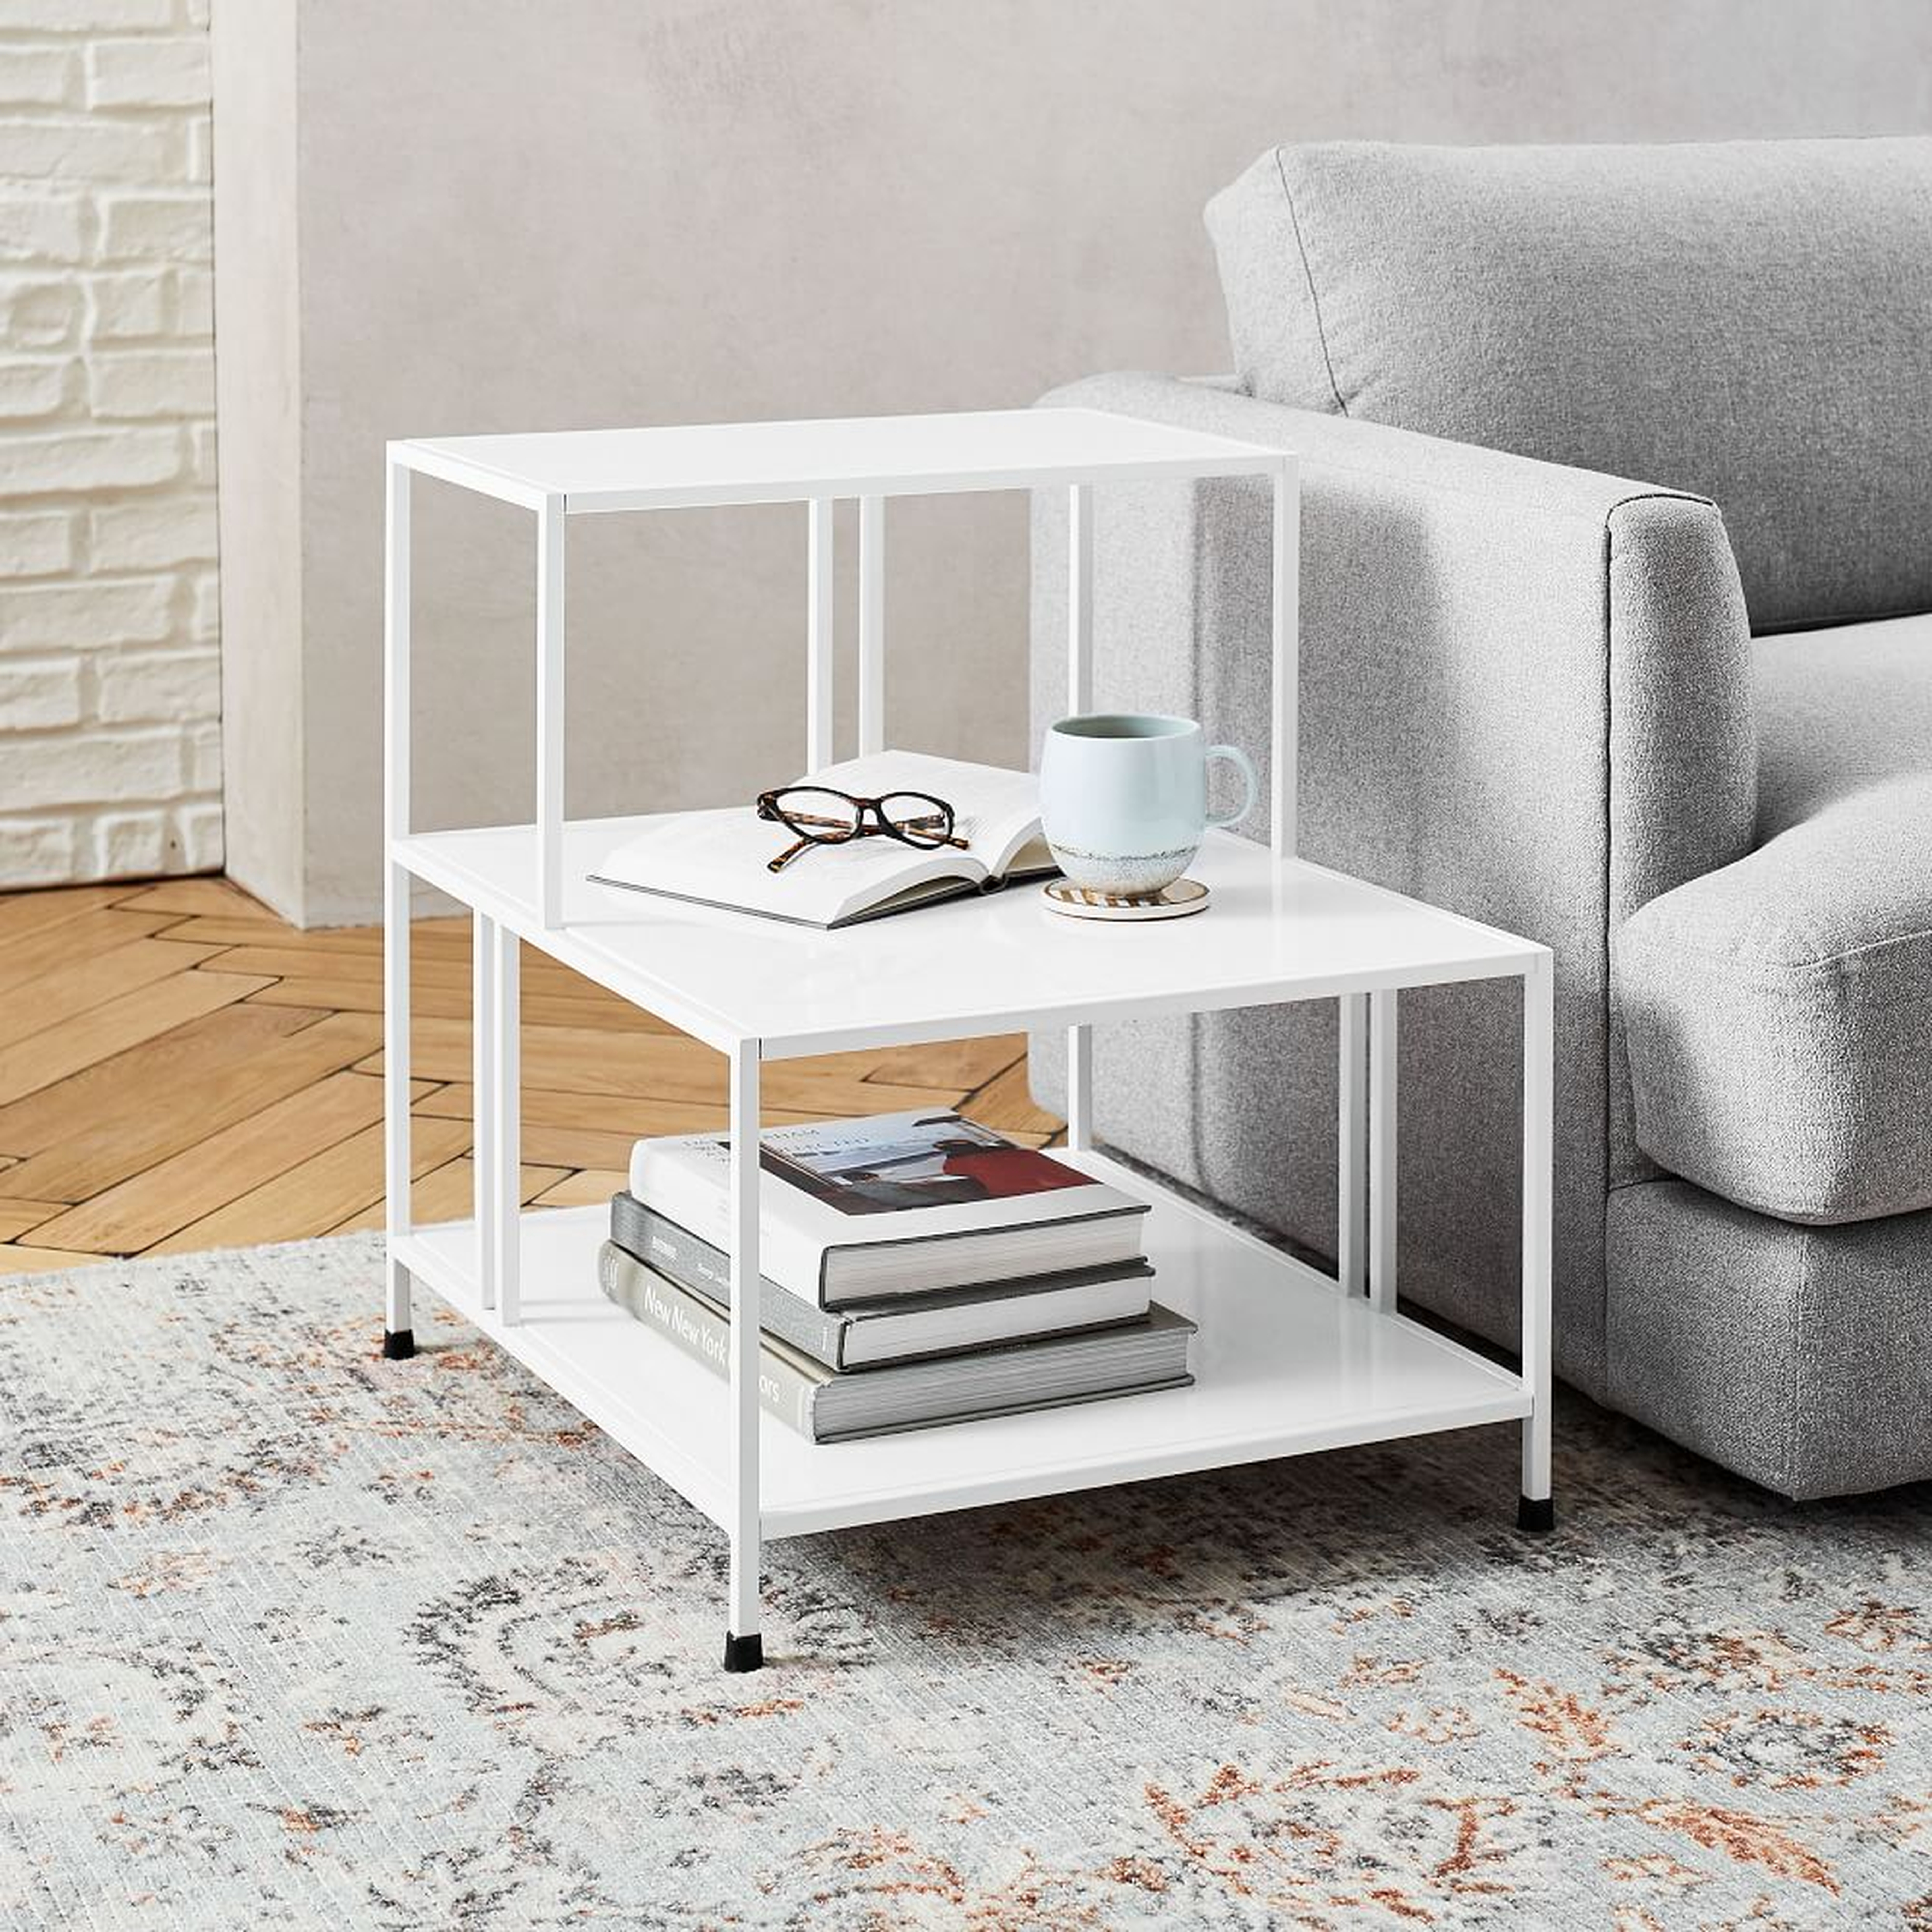 Profile Side Table, White  - West Elm